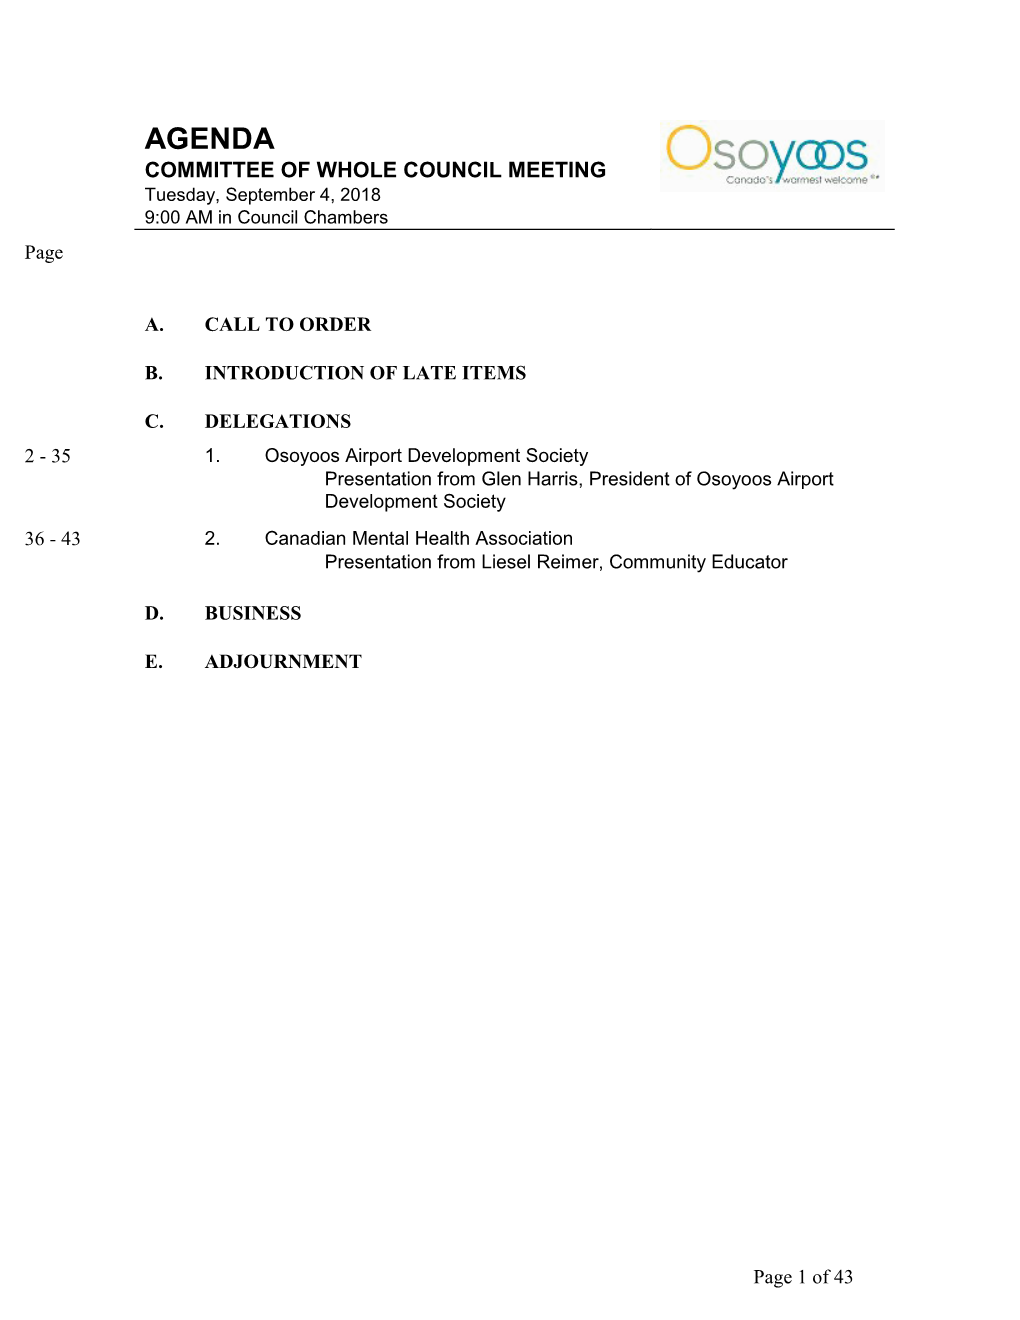 Committee of the Whole Meeting Agenda for the Meeting Held on Tuesday, September 4, 2018